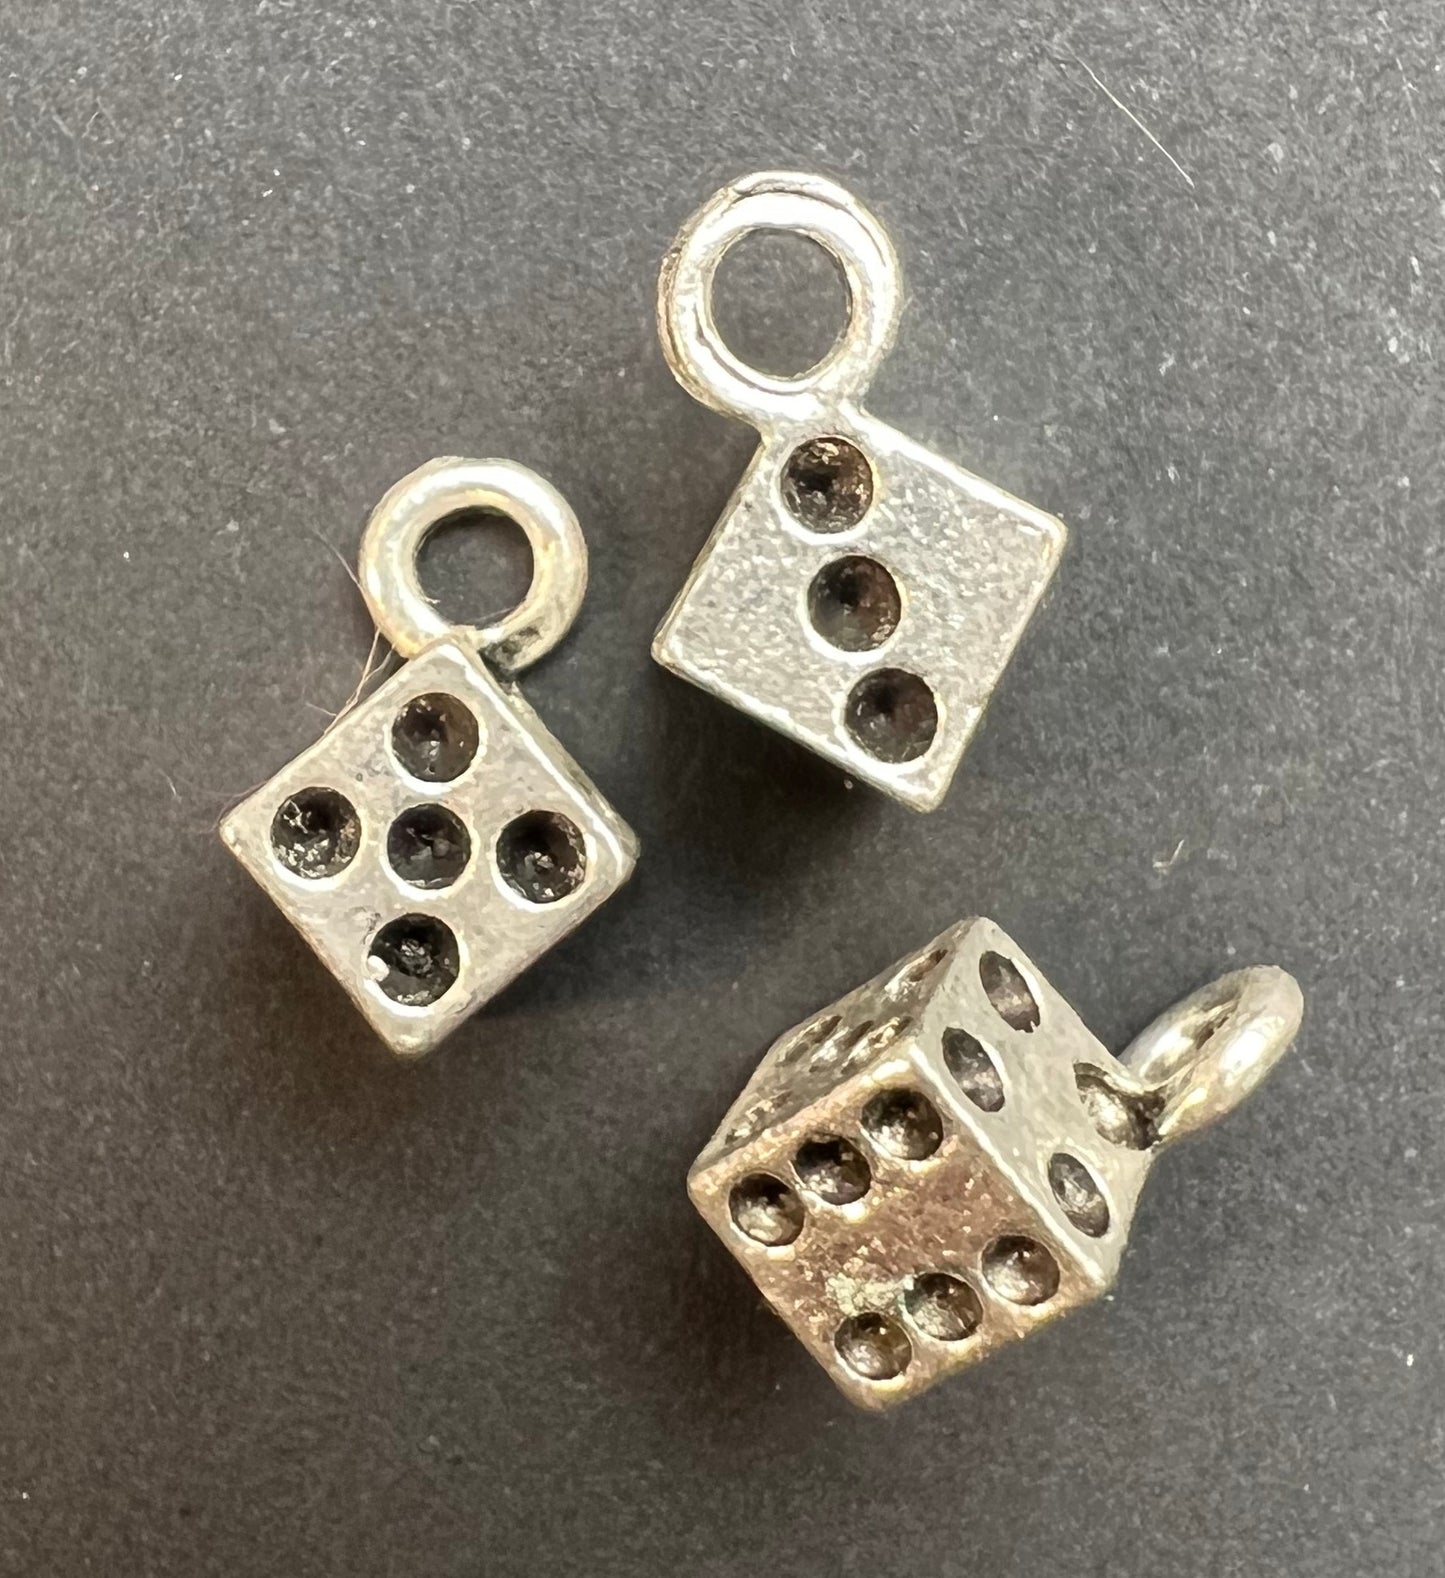 Solid 8mm Dice Charm / Pendant